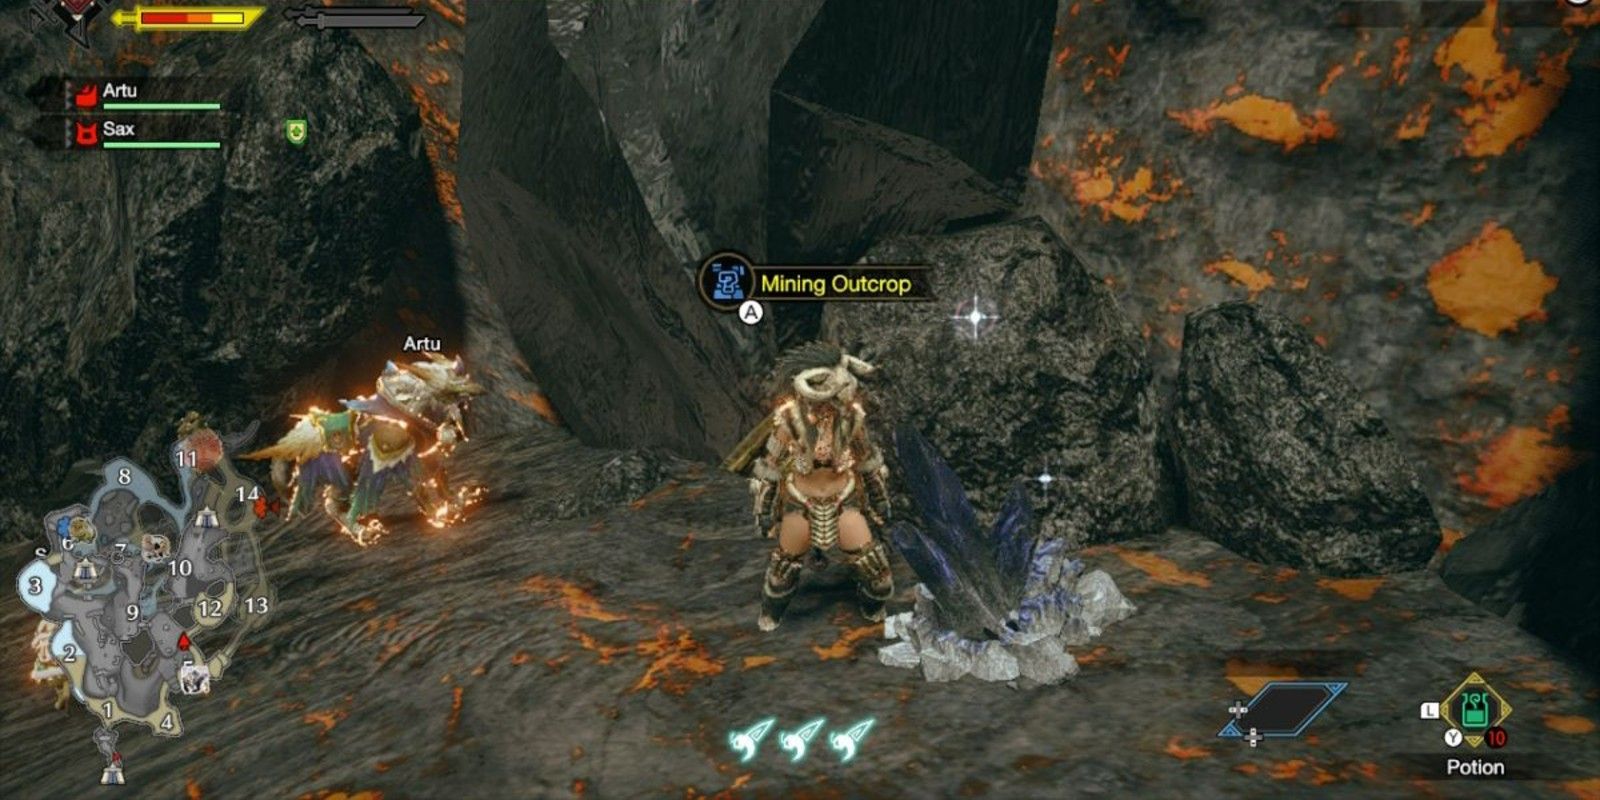 A player finds a Mining Outcrop for Dragonite Ore in Monster Hunter: Rise